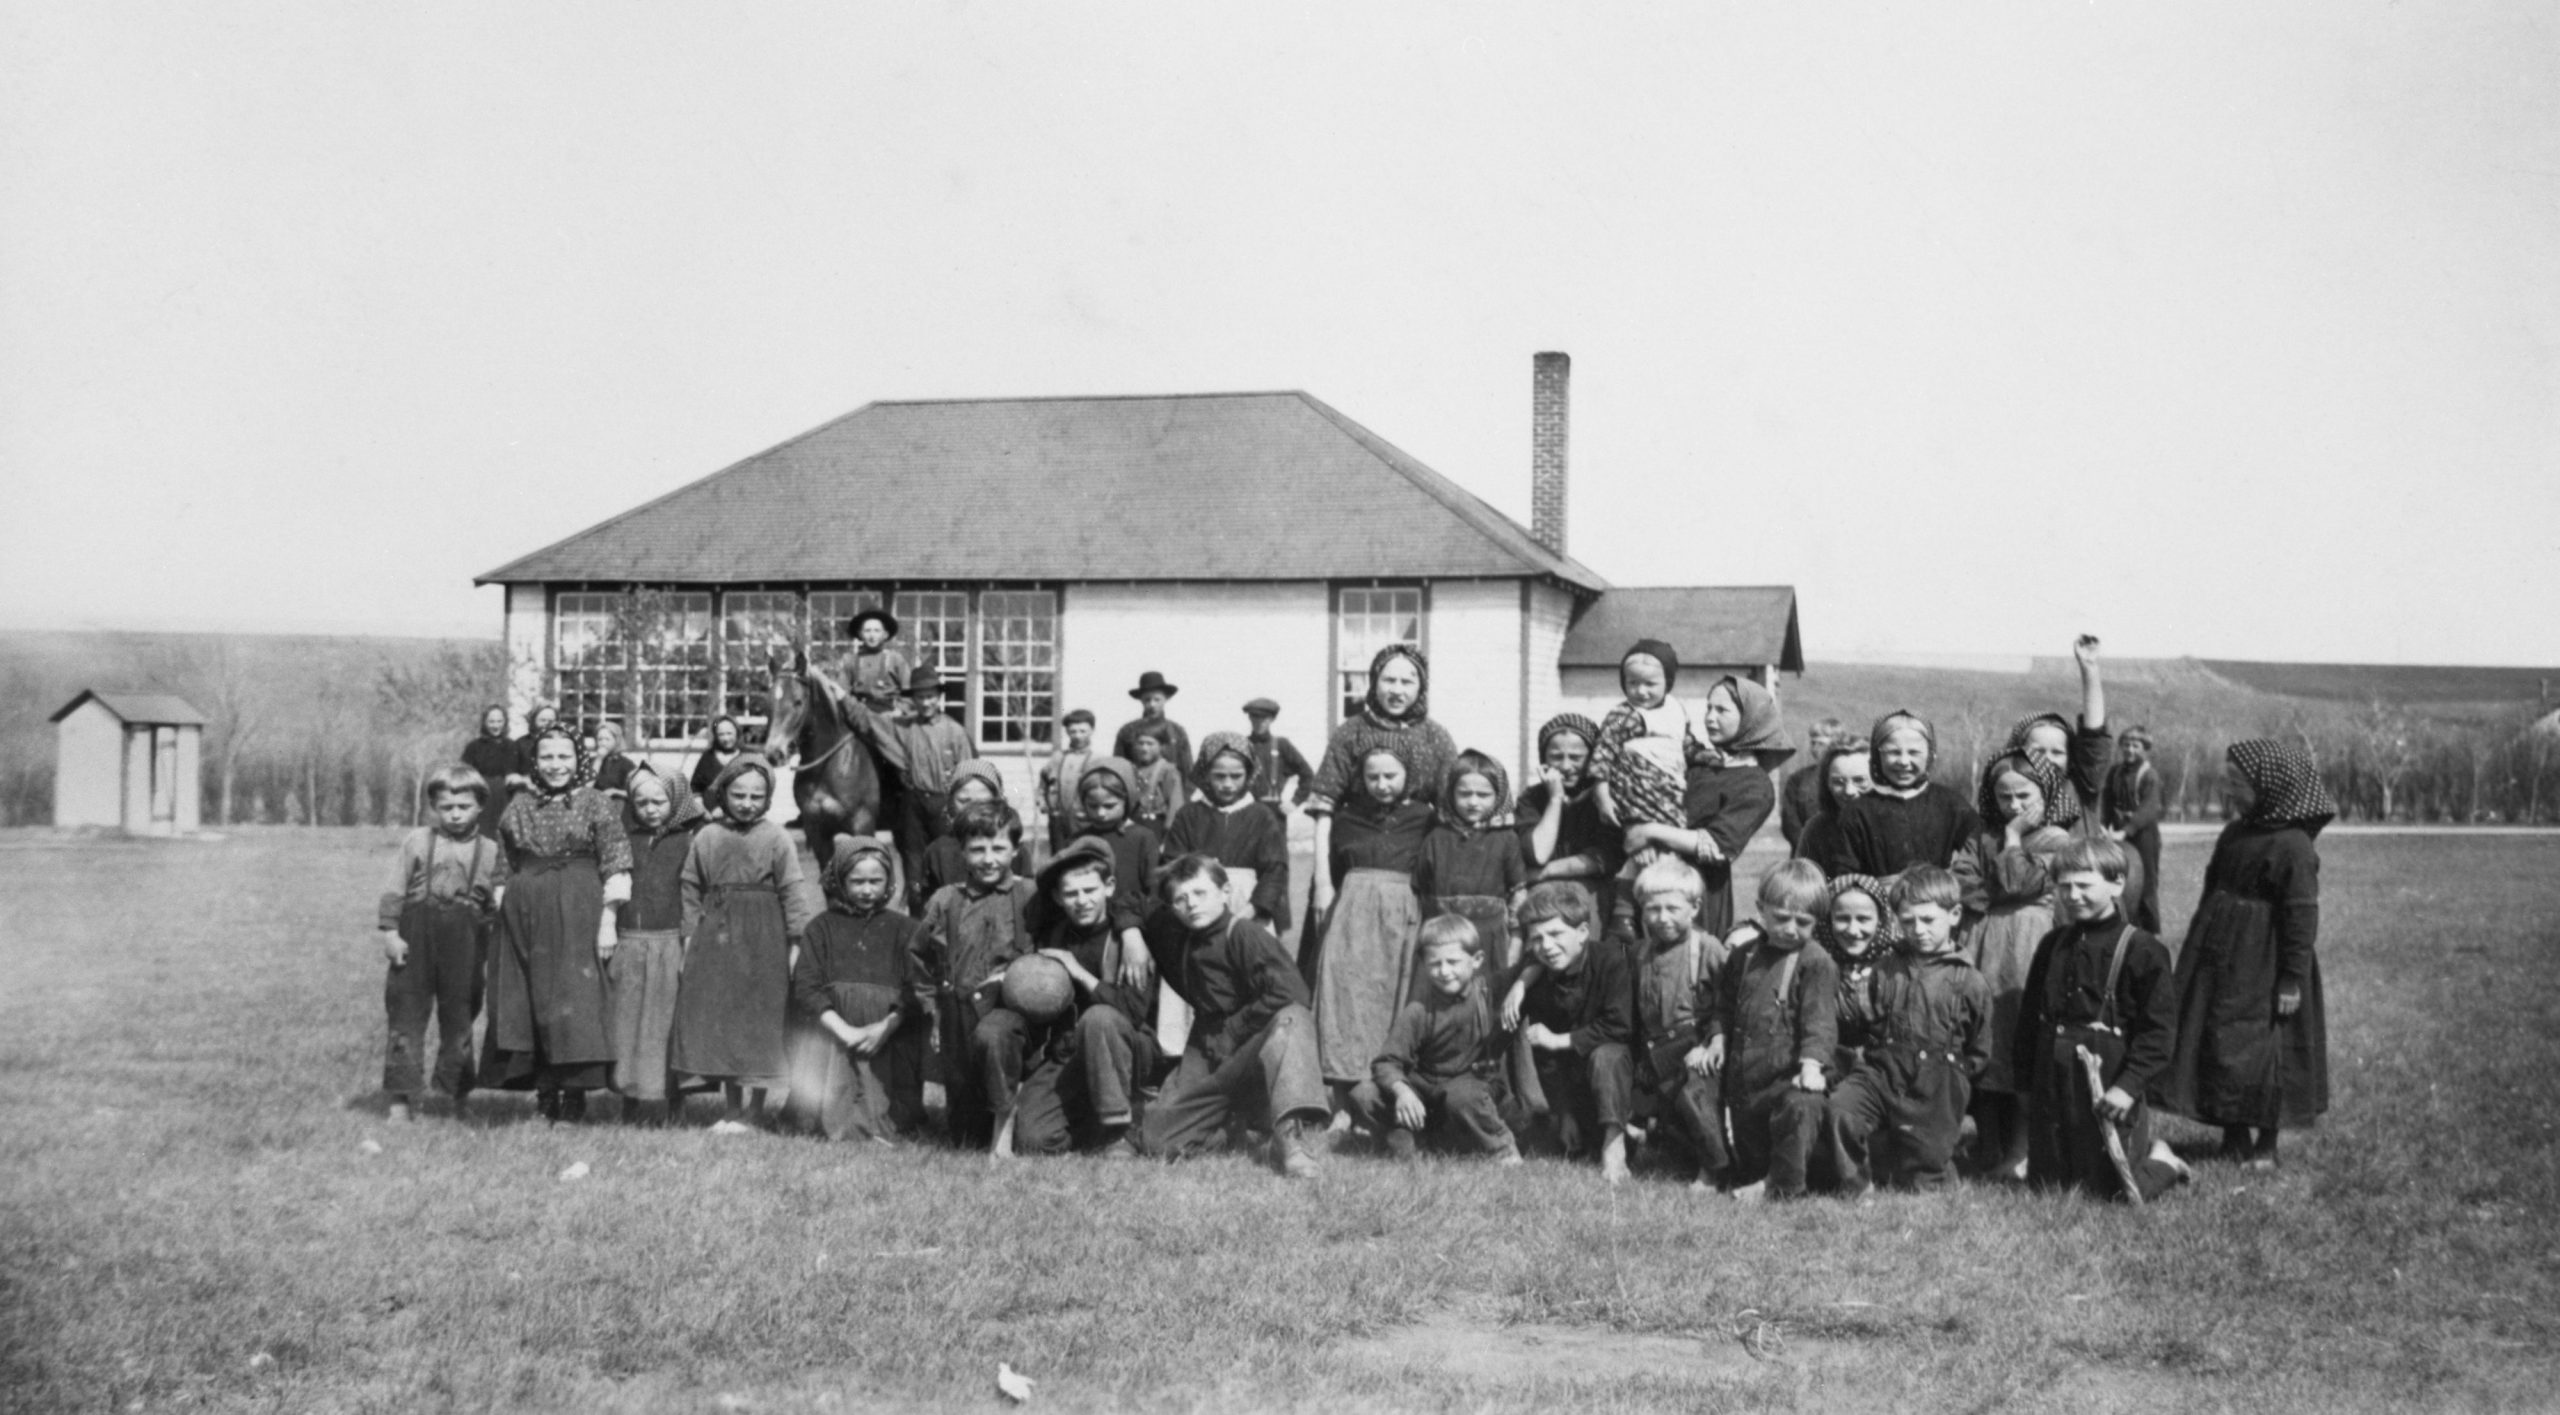 Class in front of school, outhouse in background.